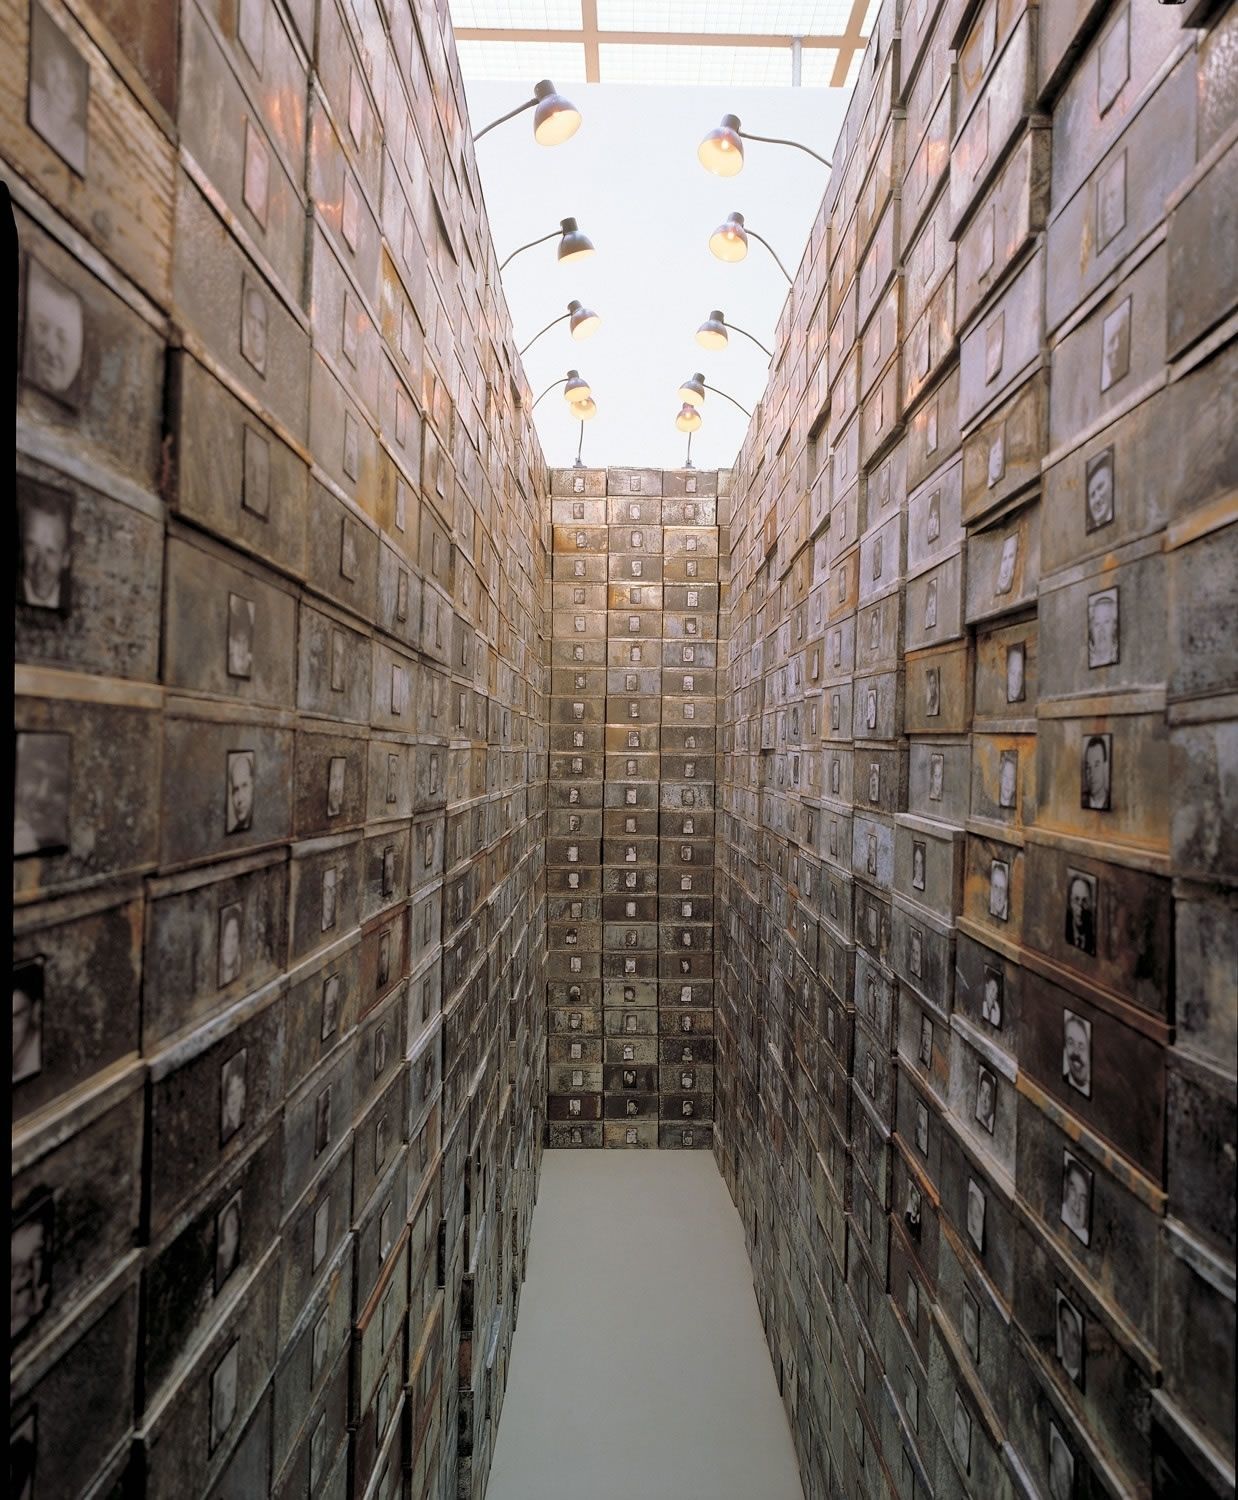 Christian Boltanski  Reserve des Suisses Morts, 1977  Tin boxes, gelatin silver print, cardboard and electric lamps  288 x 469 x 238 cm  Courtesy MACBA, Barcelona